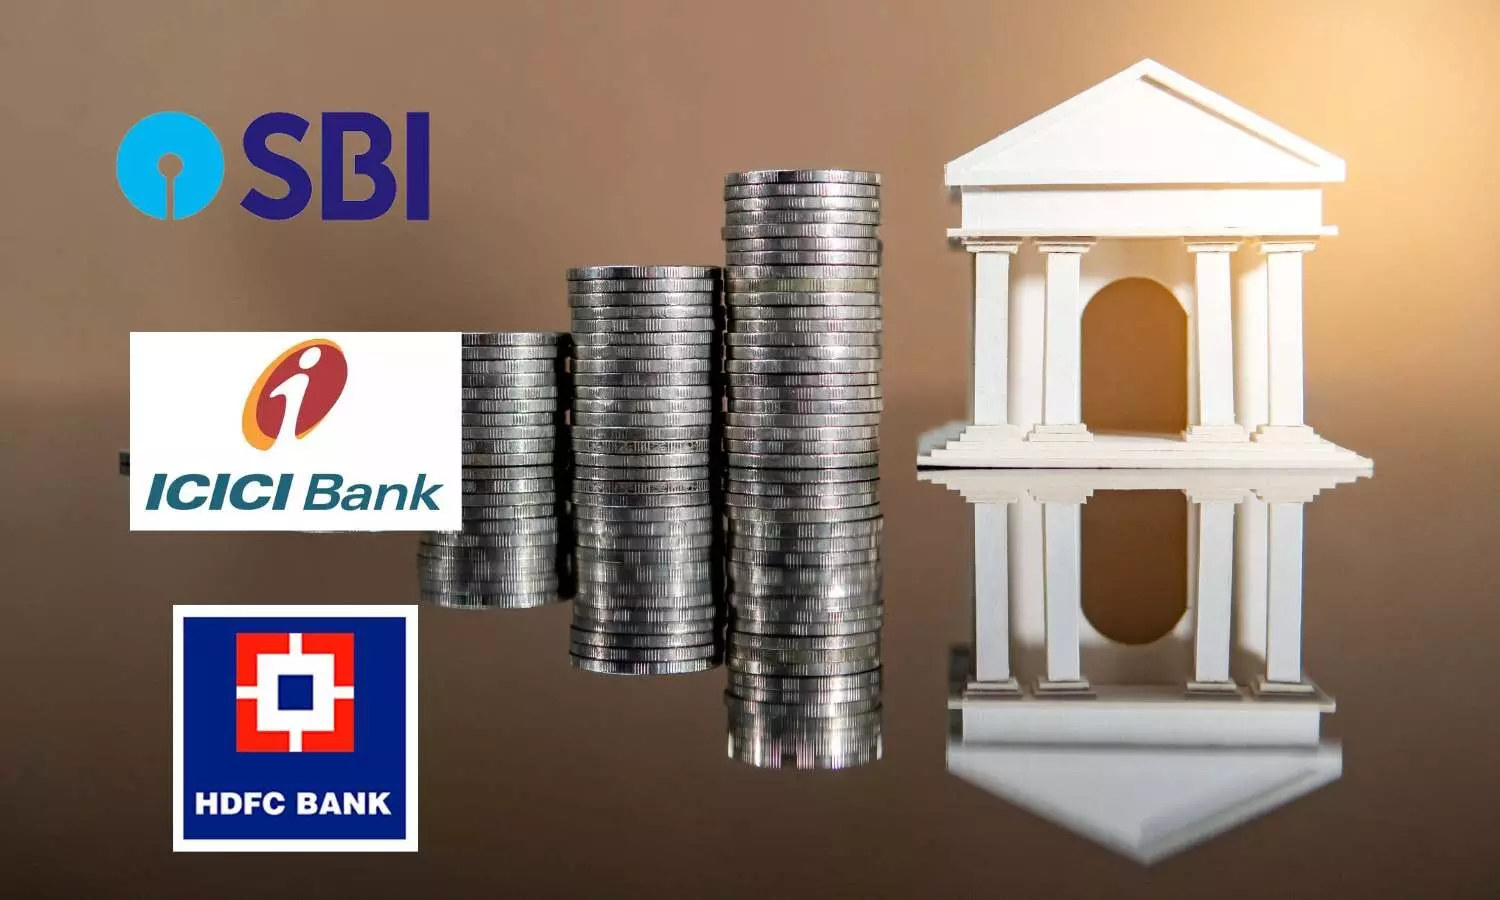 Three Indian Banks Lead in Asia-Pacific: Top 50 Rankings by Assets